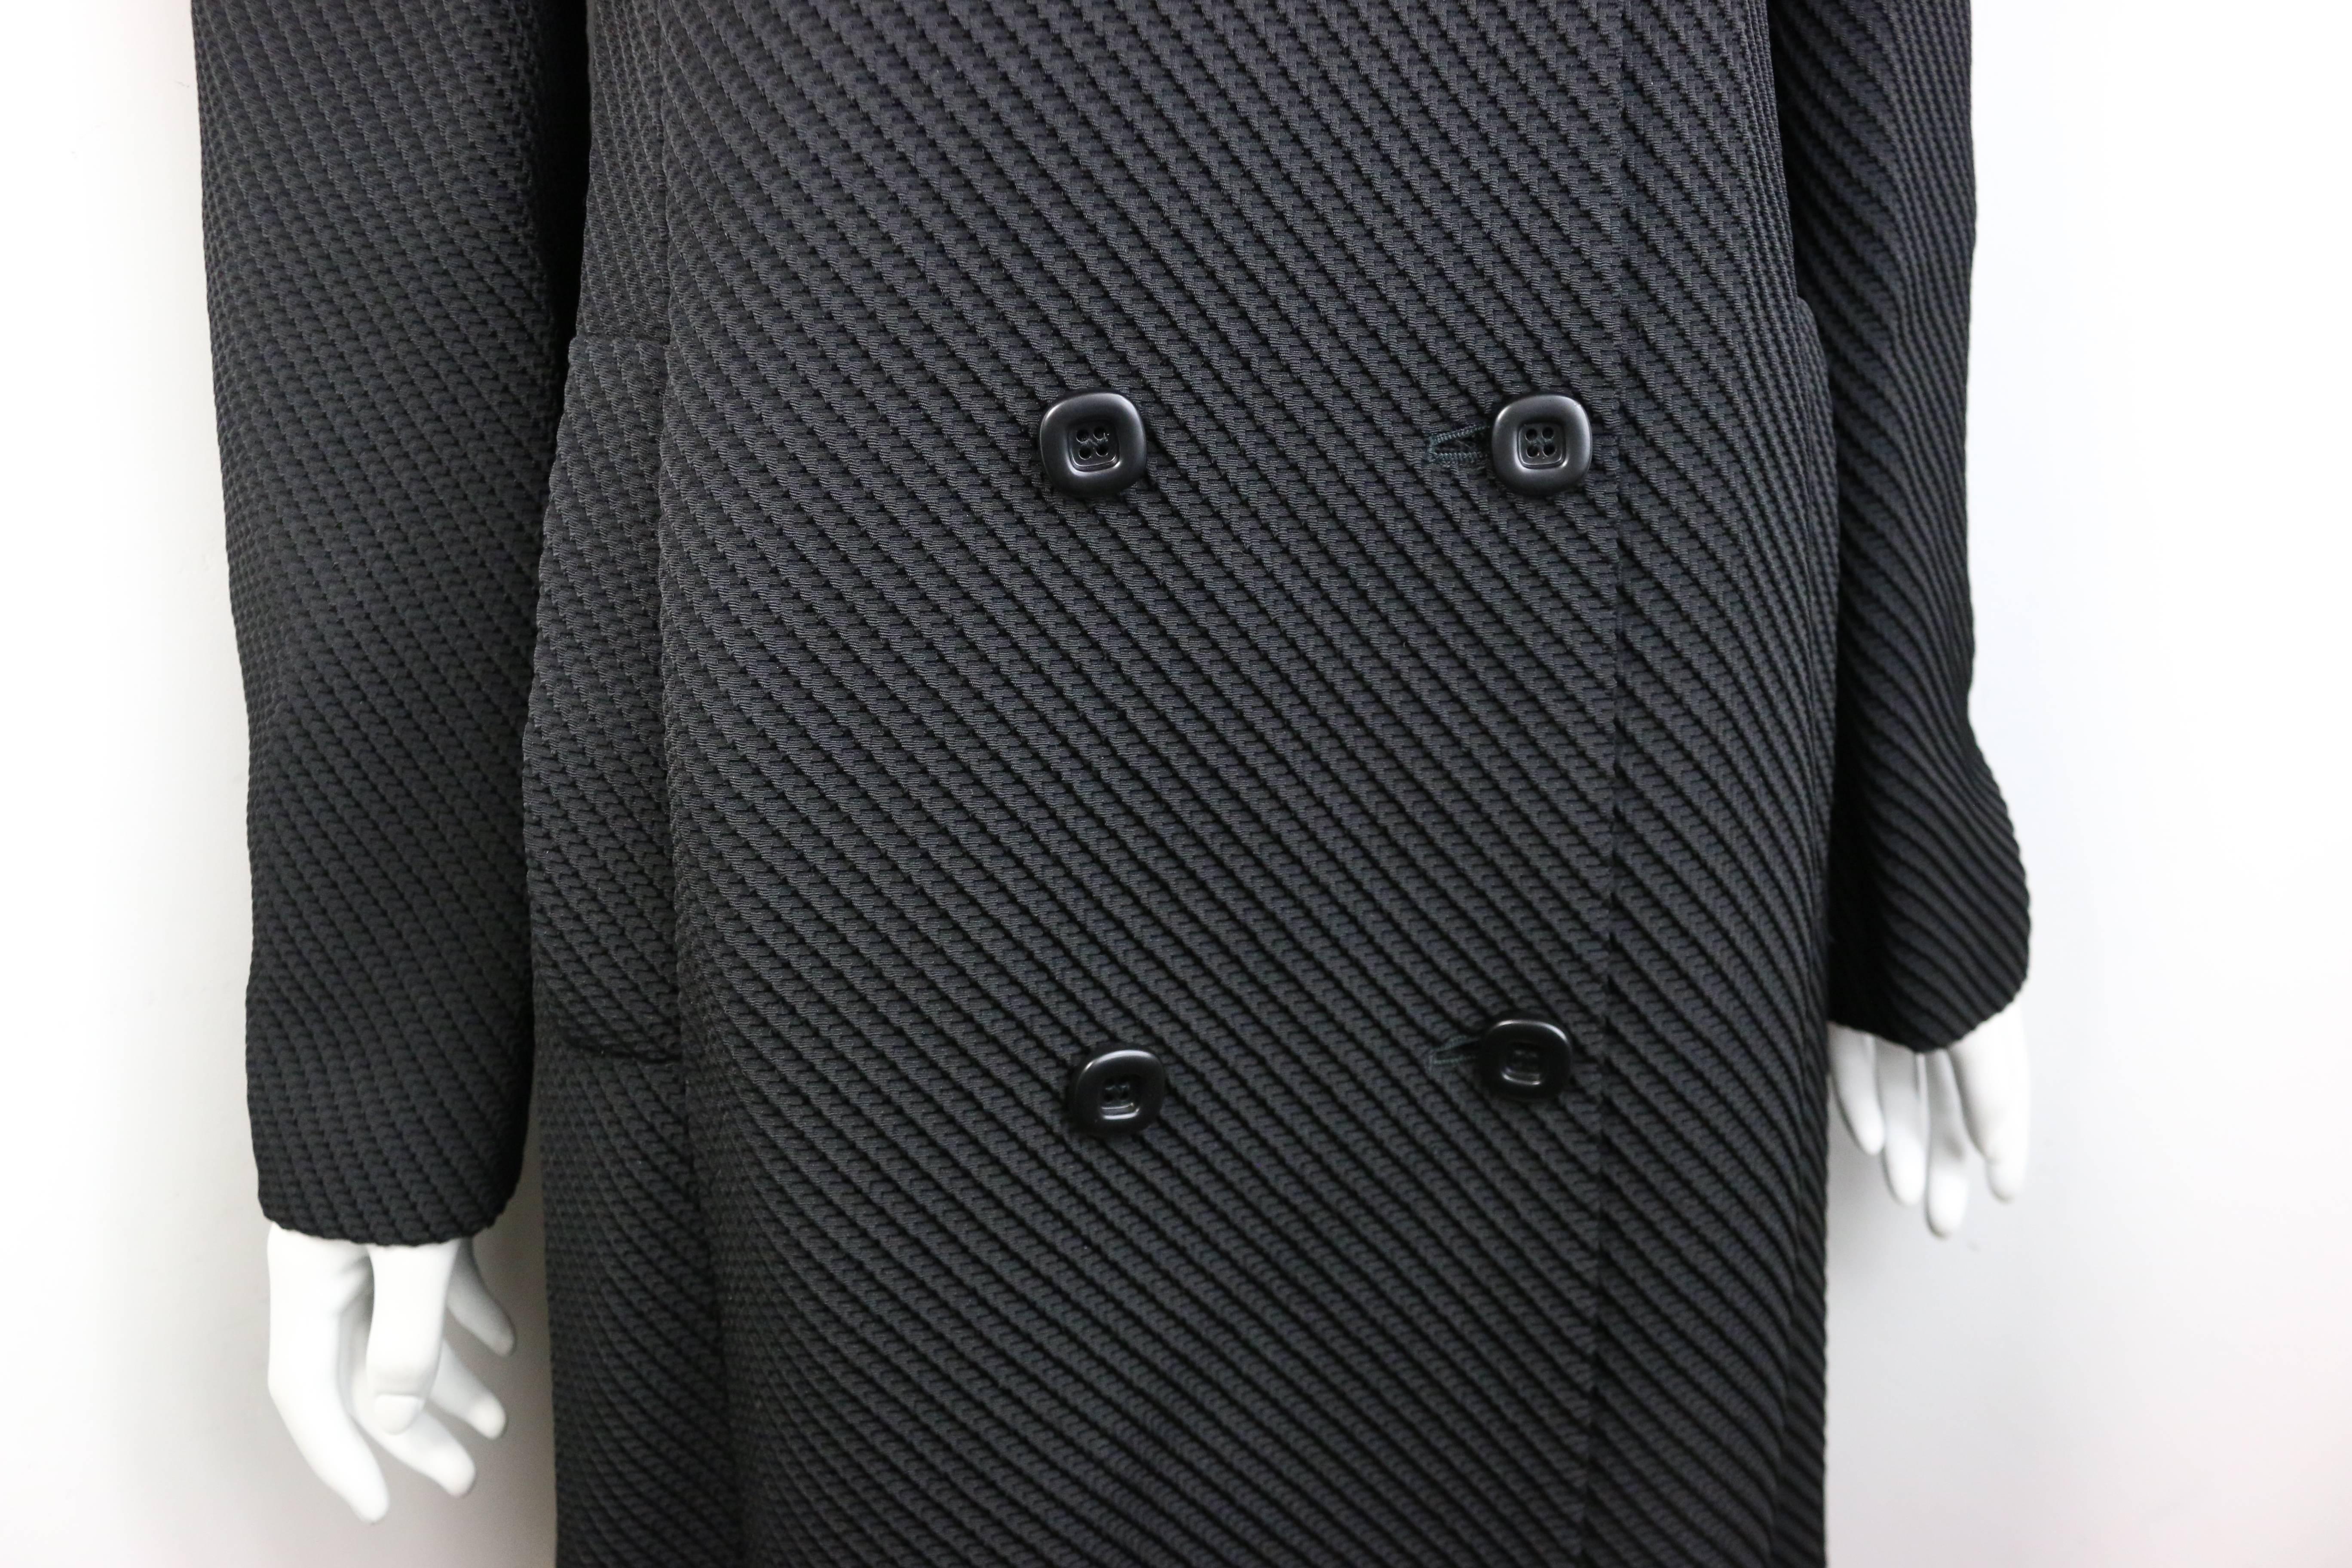 - Vintage 90s Sui by Anna Sui black stripe double breasted coat. This coat is knee length with interesting fabric and pattern design. One of a kind!!! 

- Featuring ten black square buttons fastening. Two side pockets. 

- Made in Italy. 

- Size